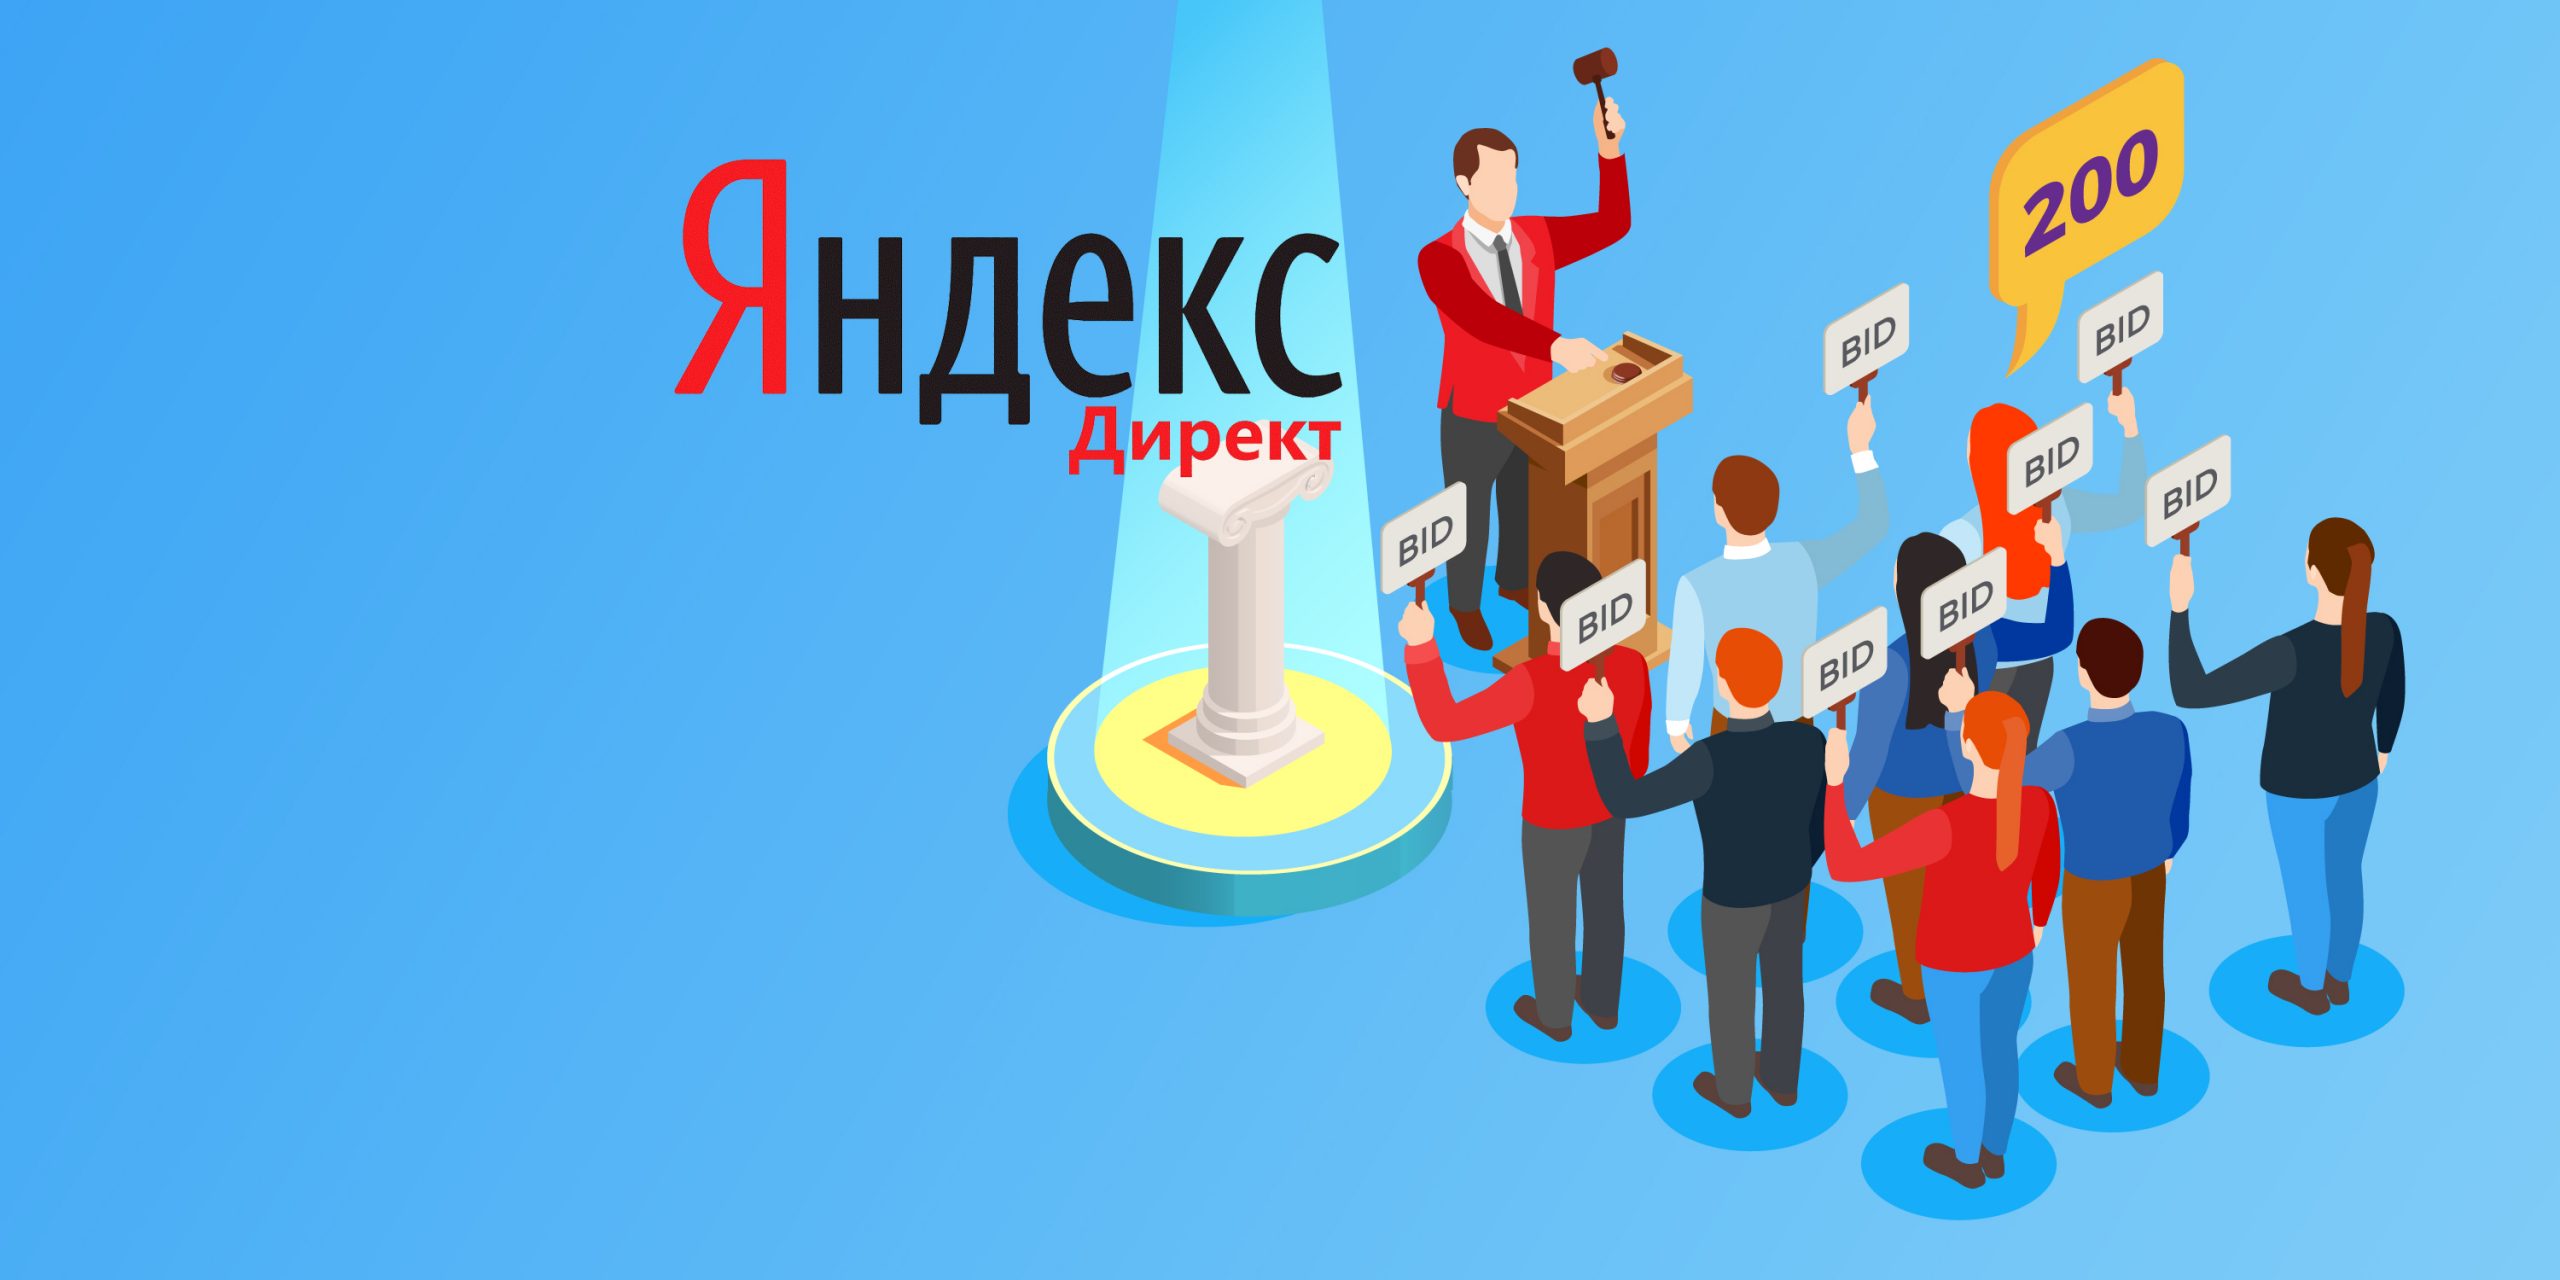 {:en}And the whole world is not enough: advertising of competitors in Yandex.Direct{:}{:ru}И целого мира мало: реклама конкурентов в Яндекс.Директ{:}